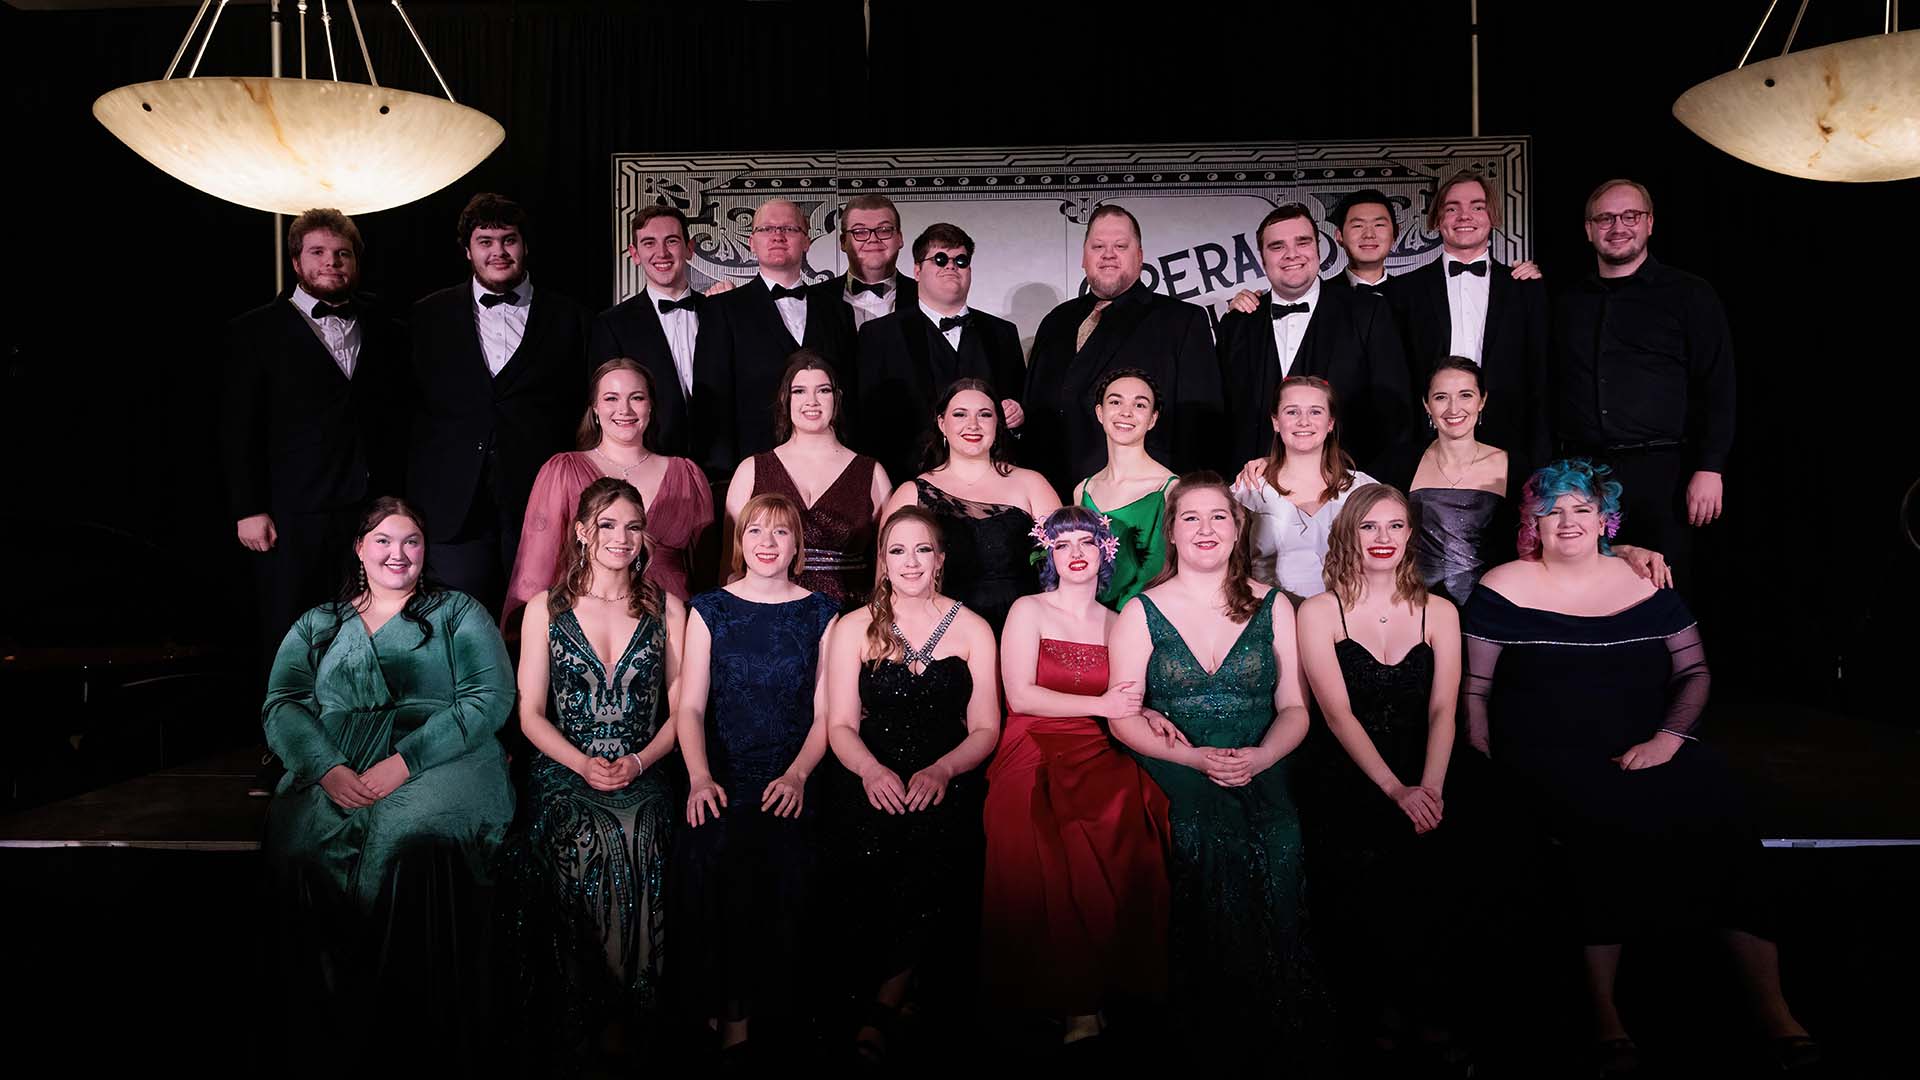 A group of 25 performers wearing formal attire, posed in three rows.